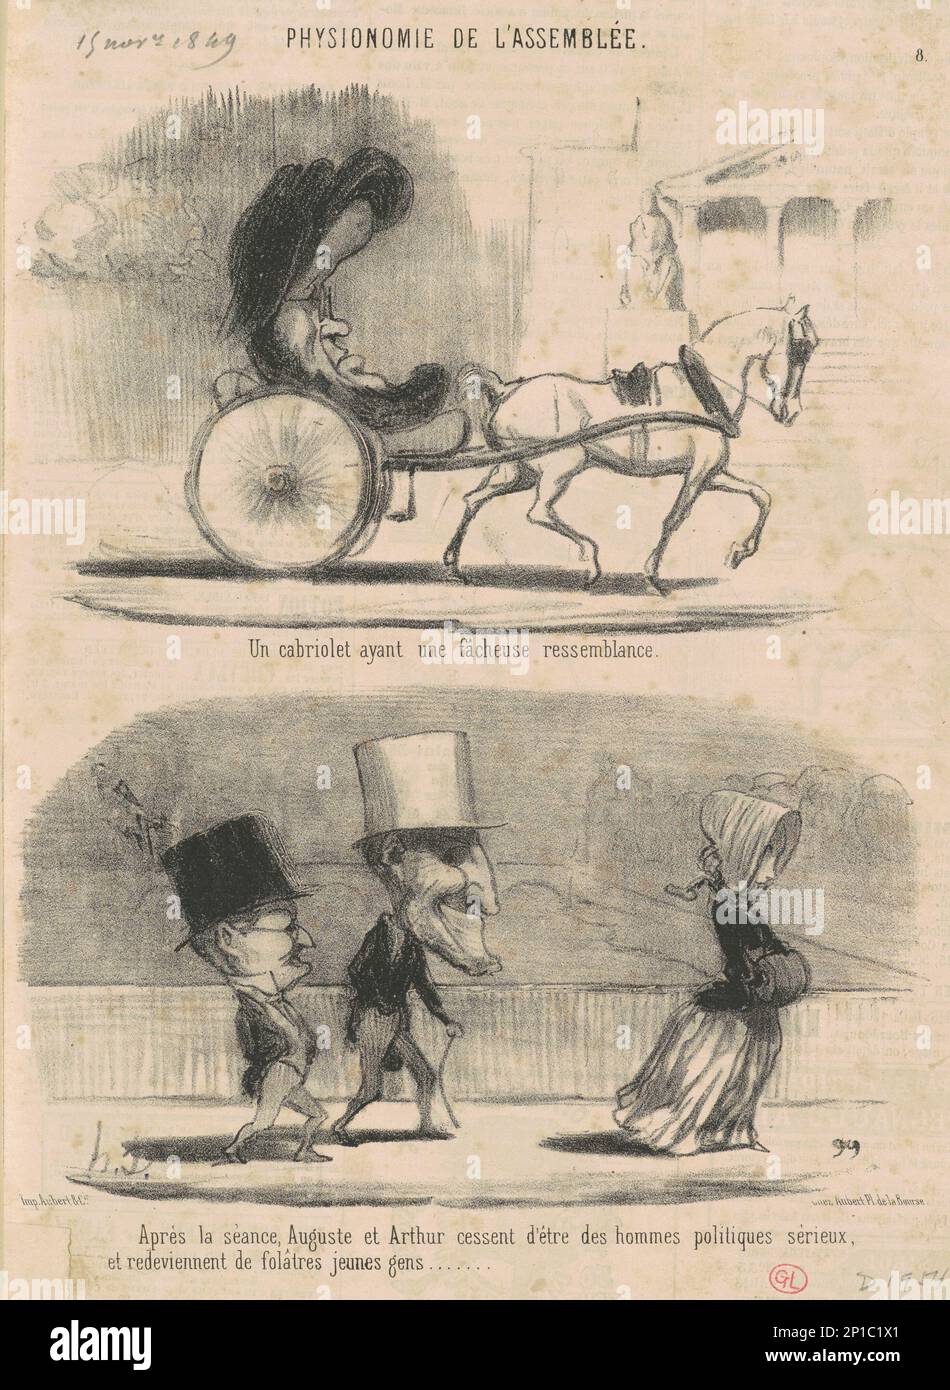 Un cabriolet ayant une facheuse ressemblance ..., 19th century.Physiogomy of the Assembly - A convertible with a striking resemblance... After the session Augustus and Arthur cease to be serious politicians and become exuberant young men again. Stock Photo